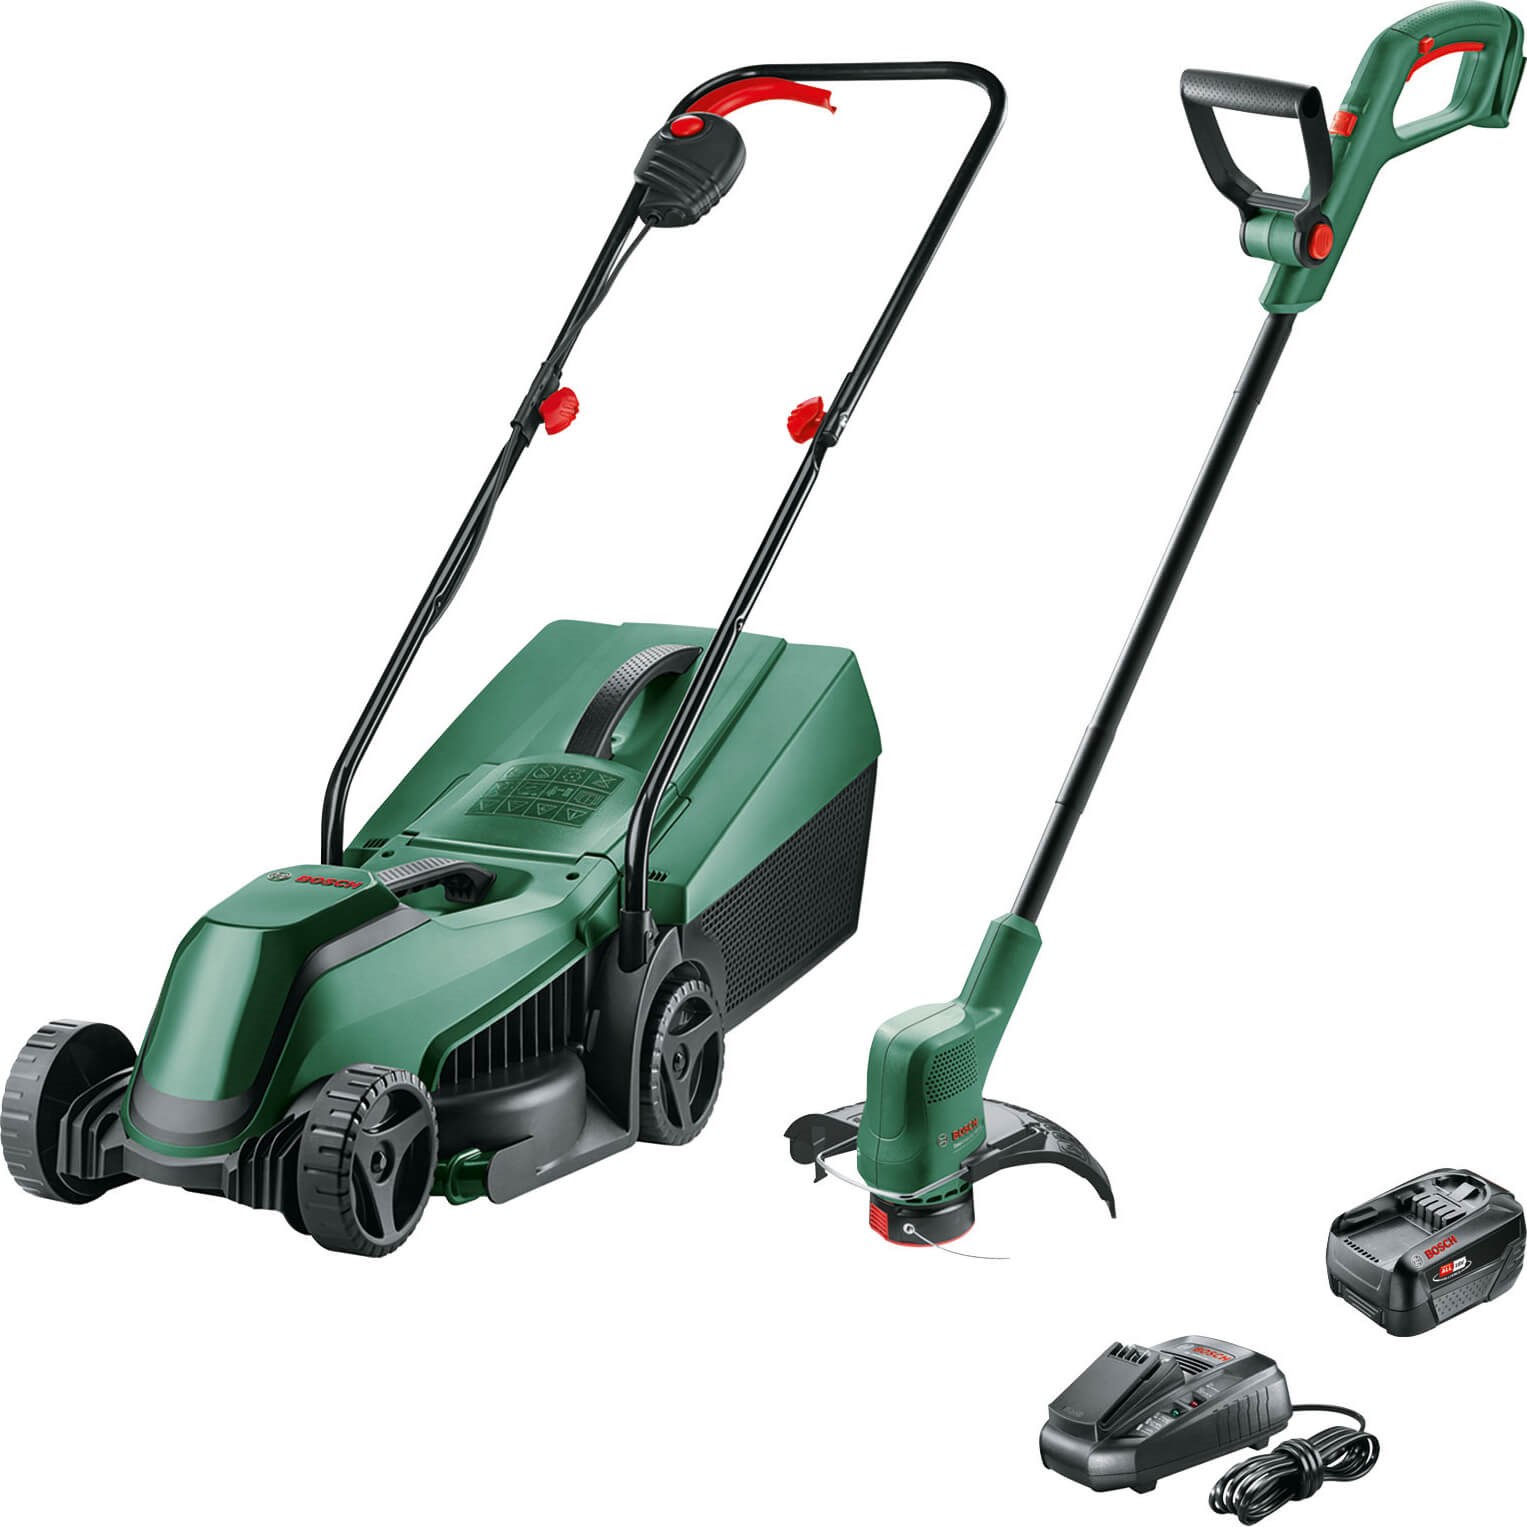 Bosch Home and Garden Cordless Grass Trimmer EasyGrassCut 18V-26 (Without  Battery, 18 Volt System, Cutting Diameter: 26 cm, in Carton Packaging)